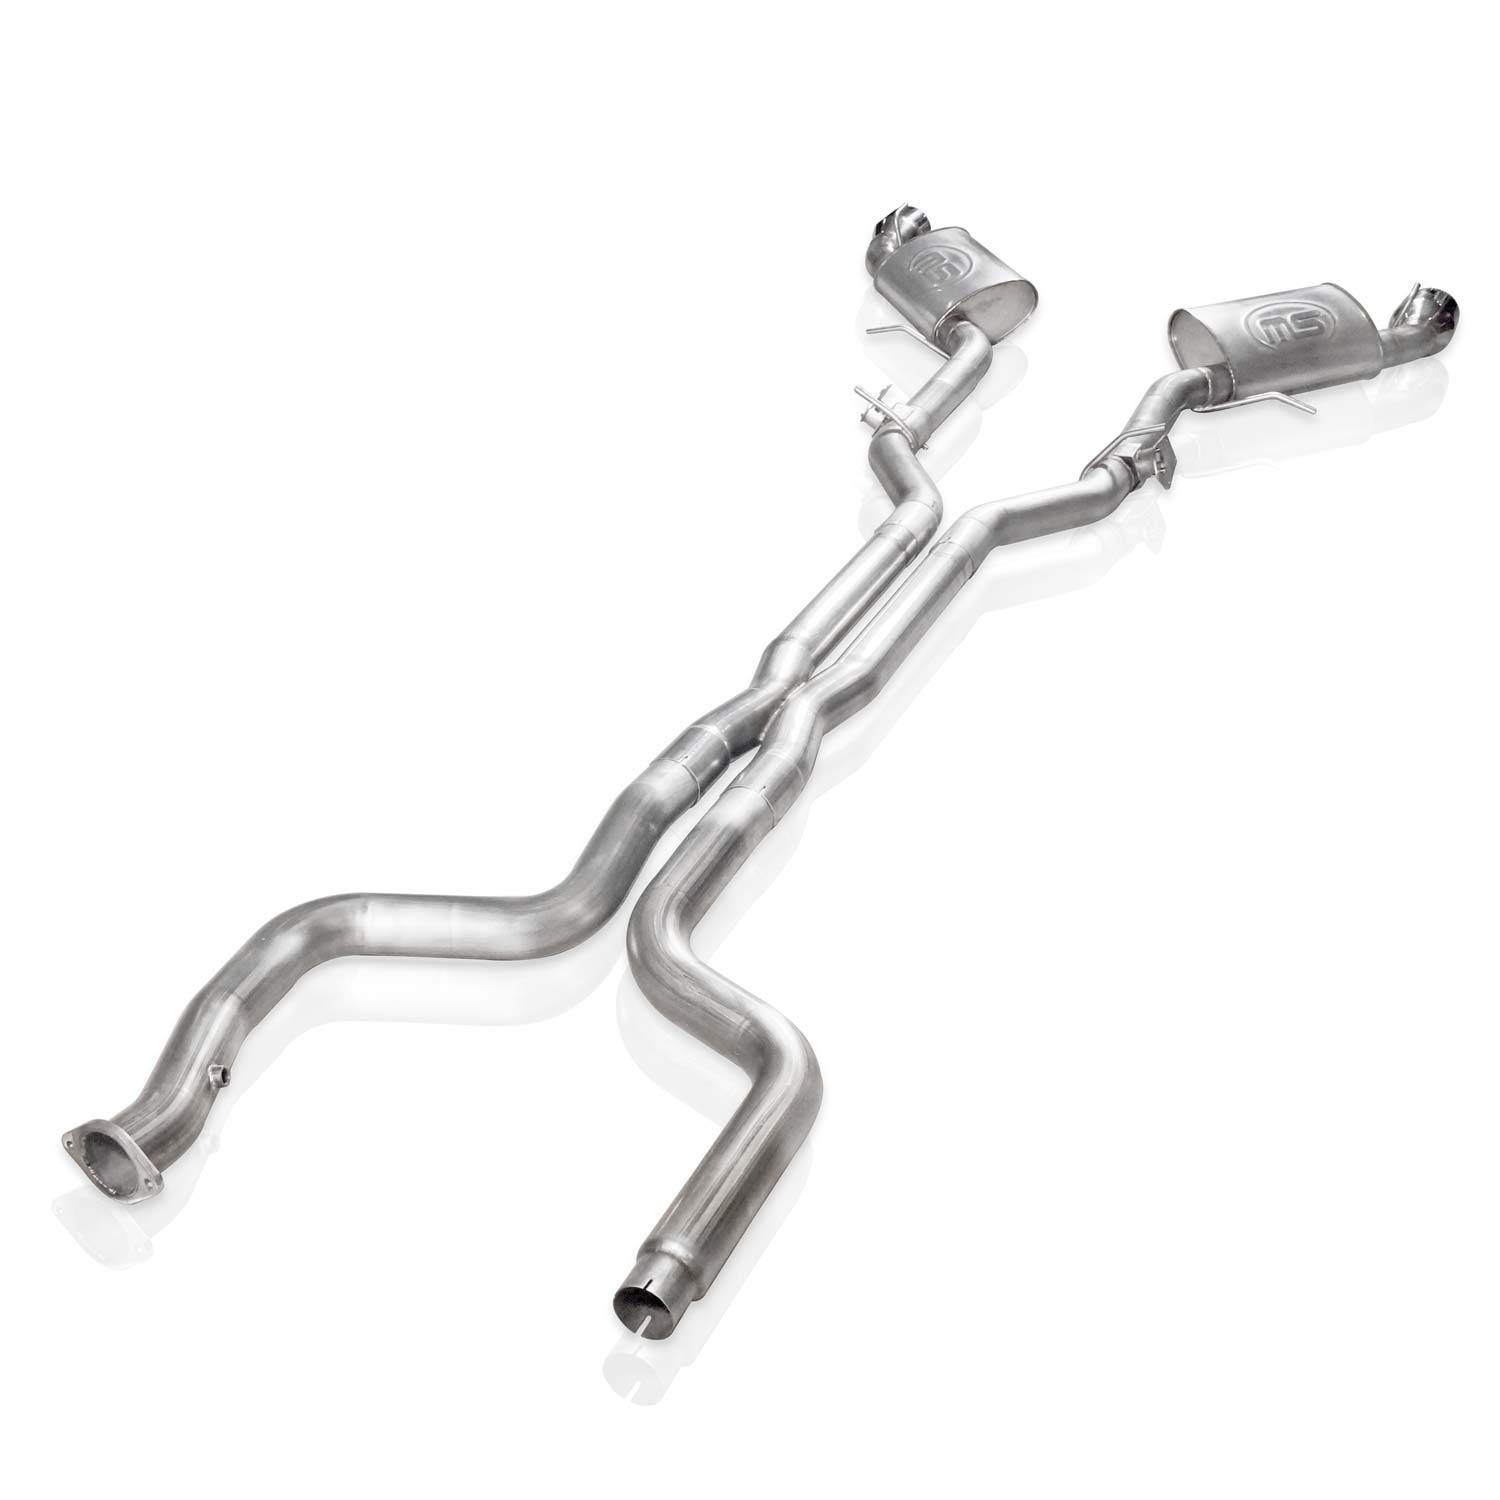 Camaro SS Stainless Works Exhaust Catback with Dual Tips - RPIDesigns.com